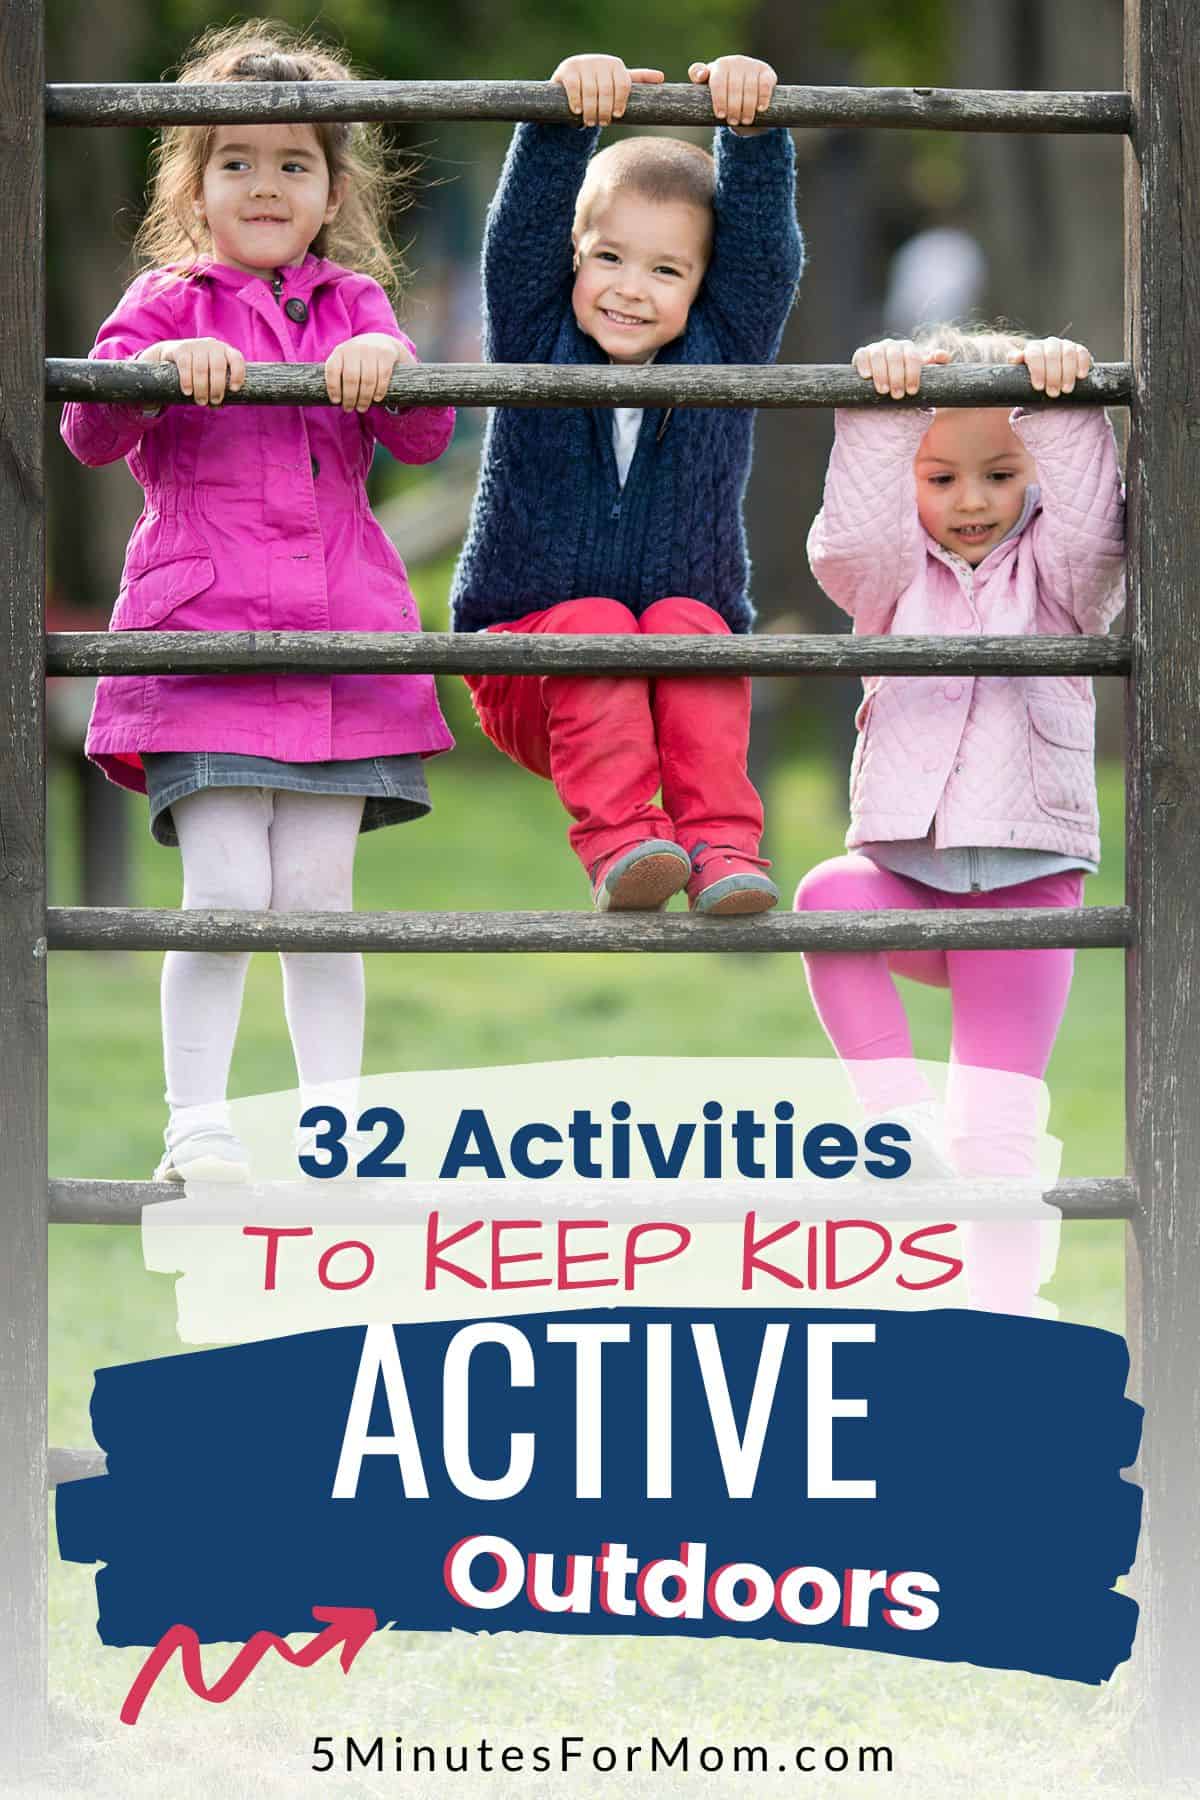 3 Young kids climbing on a playground. Text overlay says 32 Activities to Keep Kids Active Outdoors.